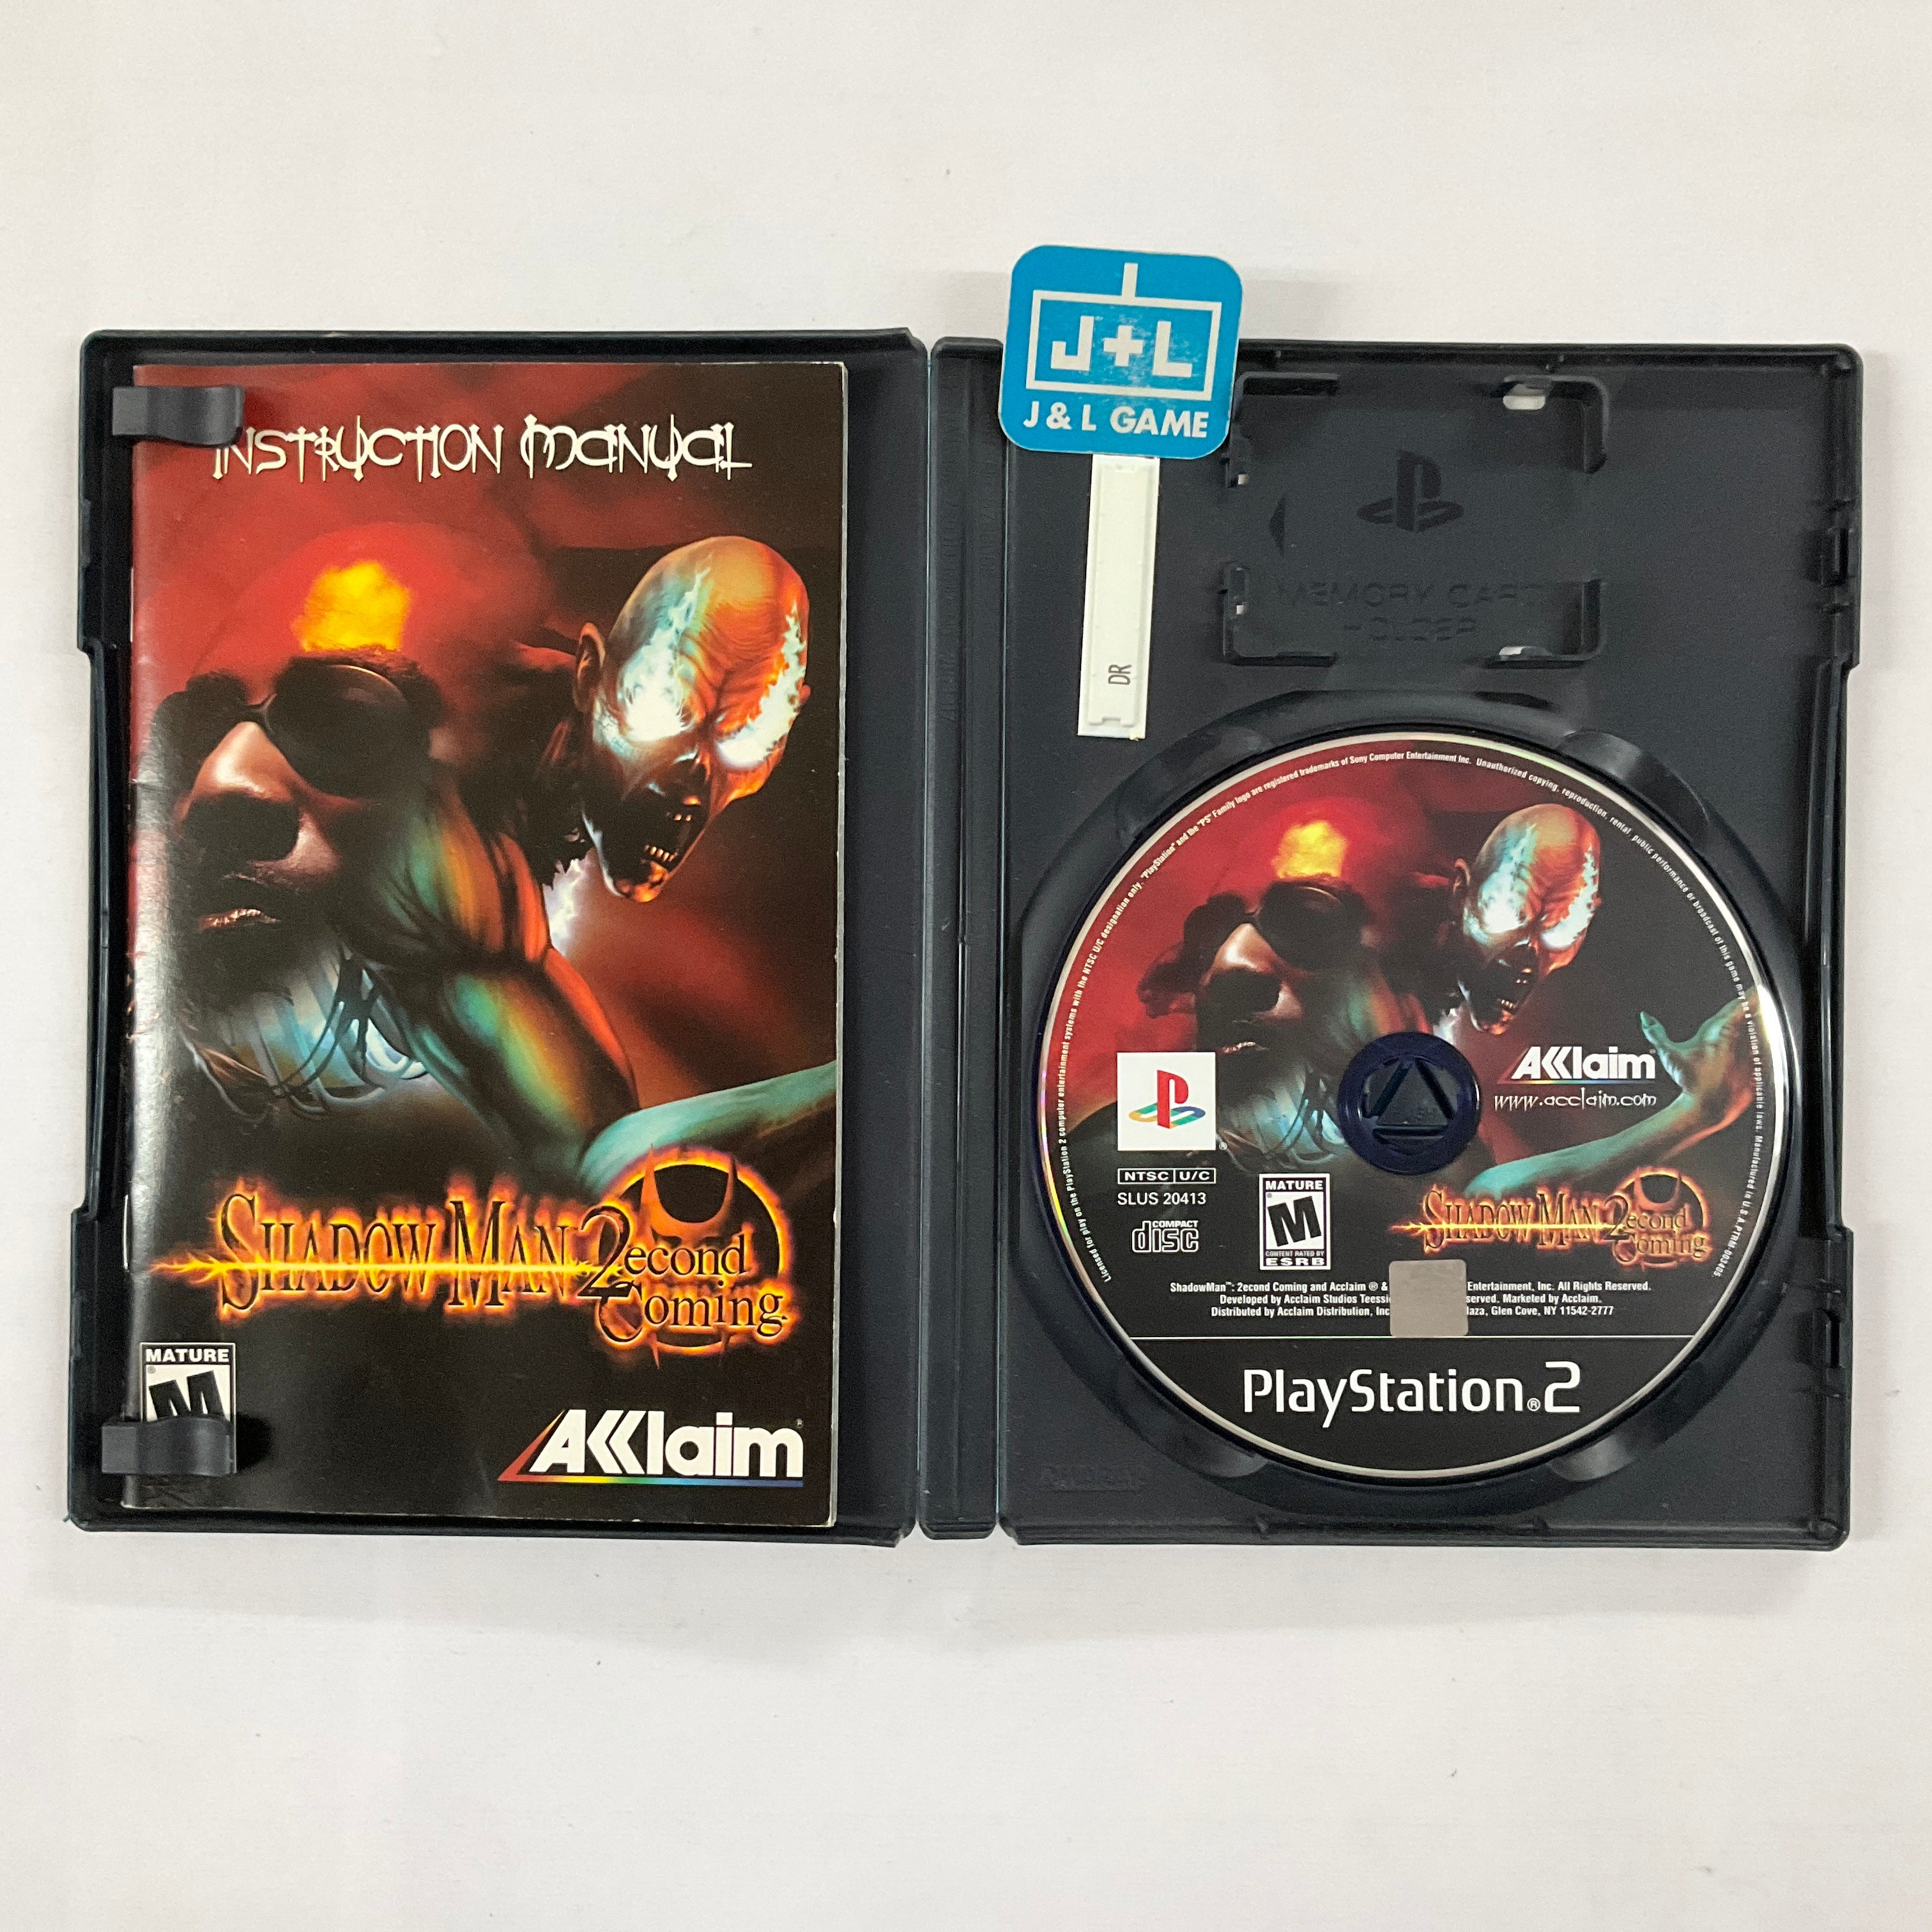 Shadow Man: 2econd Coming - (PS2) PlayStation 2 [Pre-Owned] Video Games Acclaim   